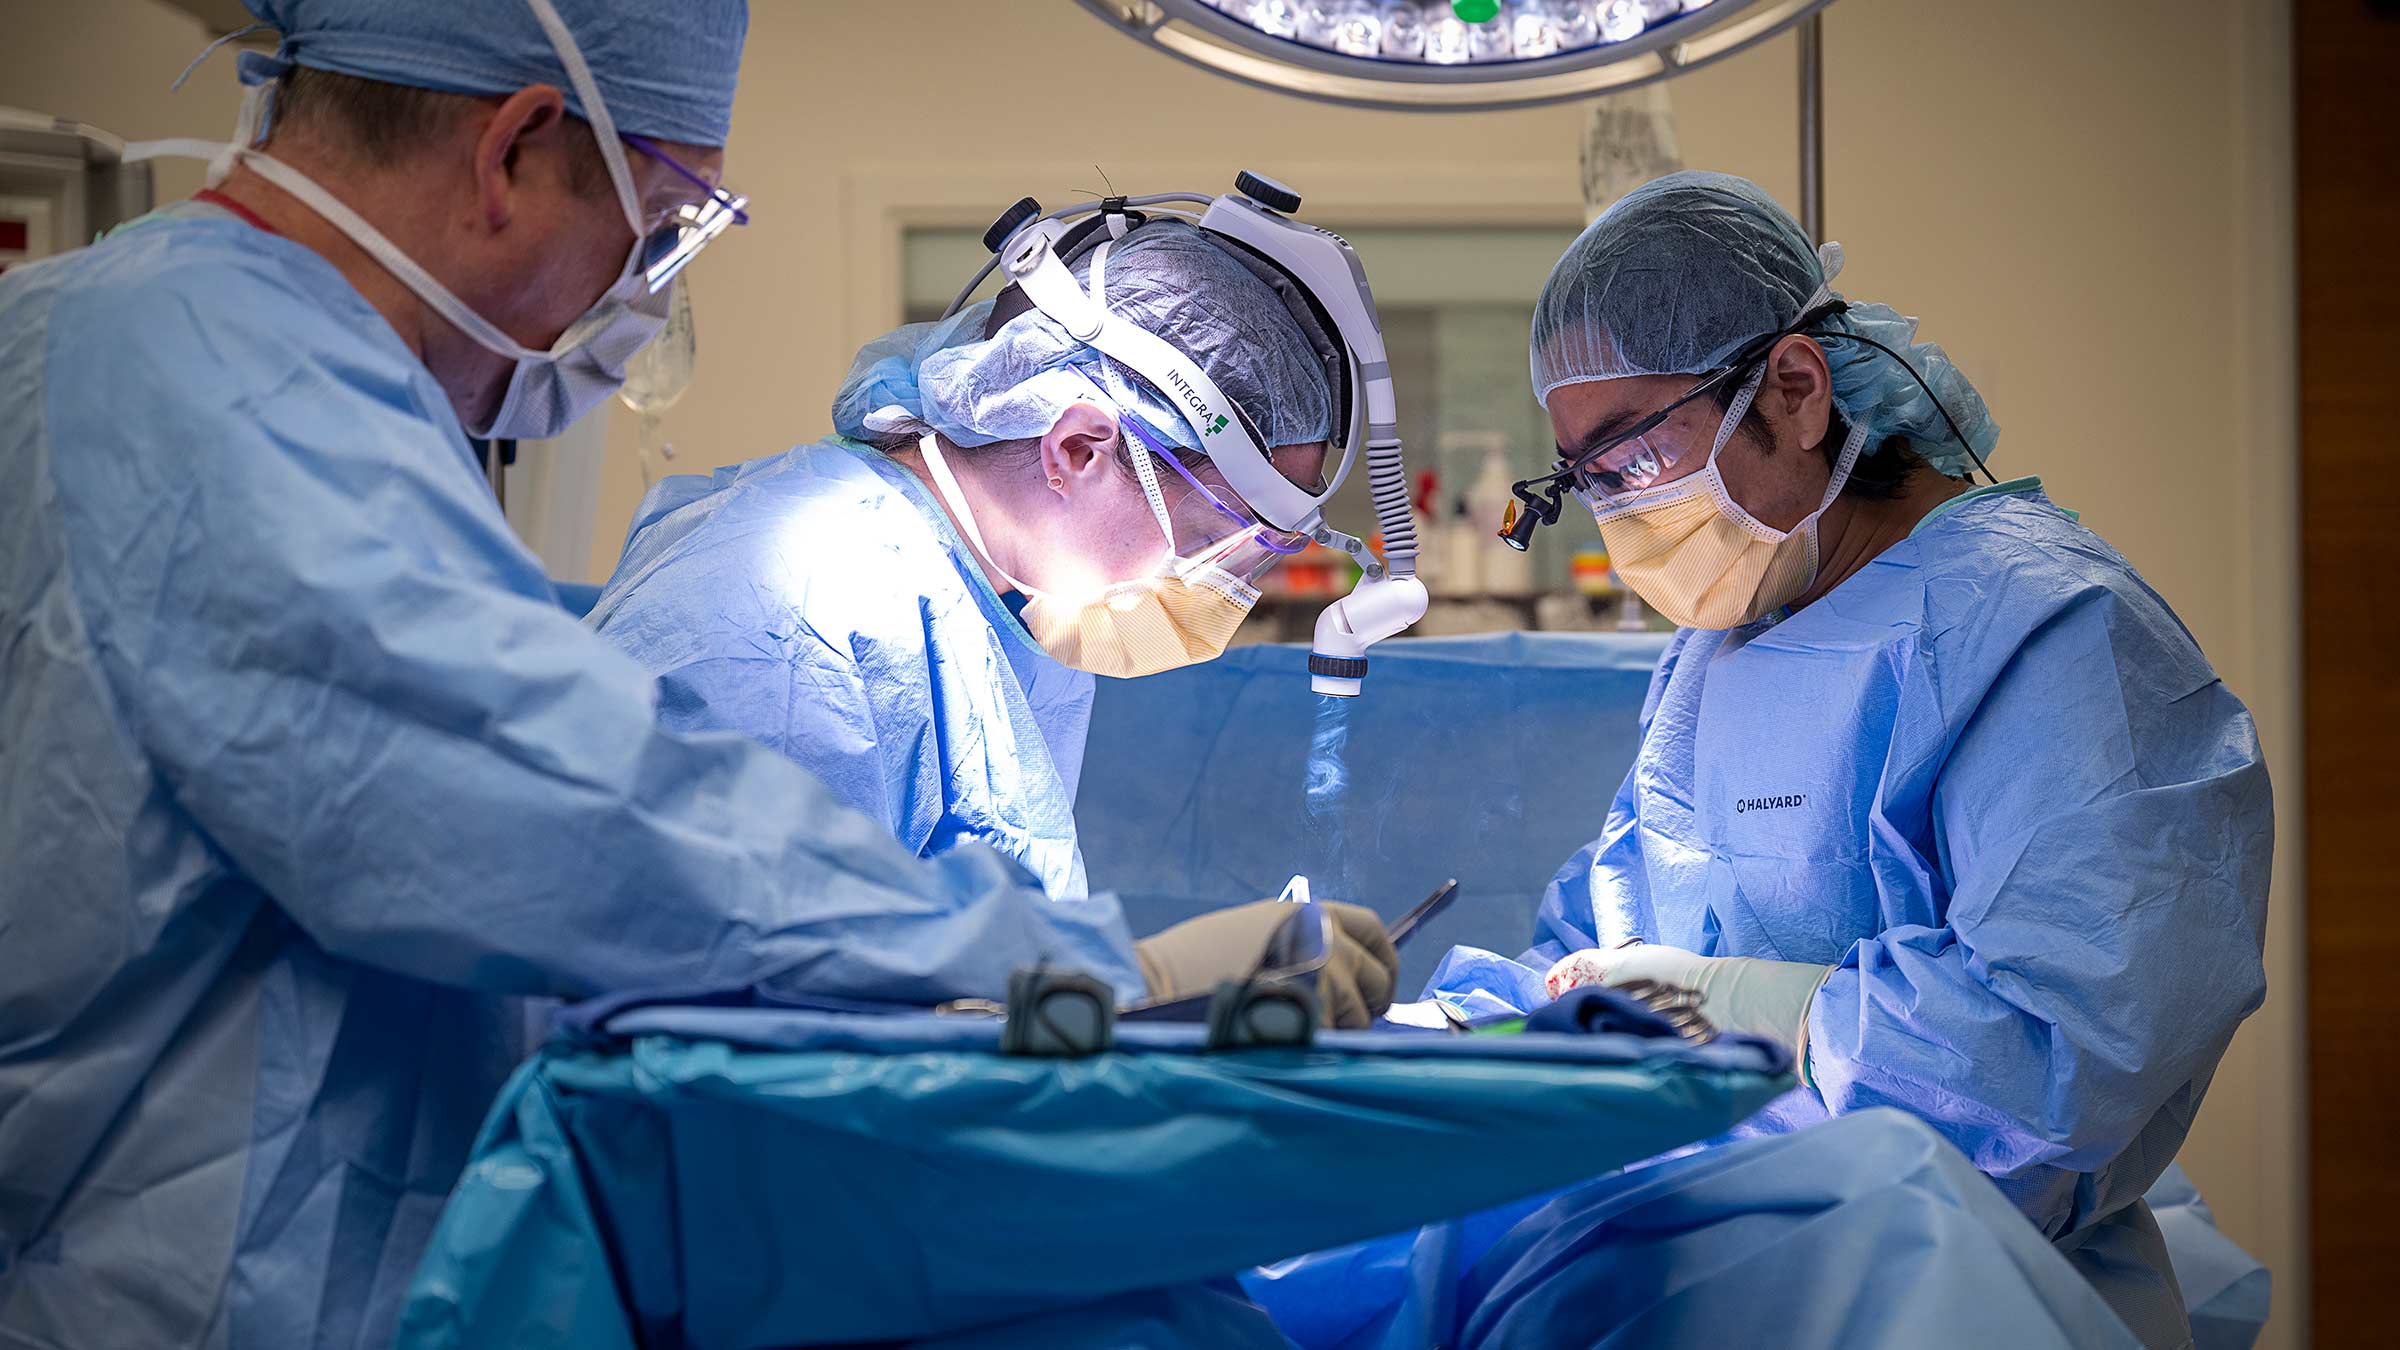 Dr. Kim with his team performing a surgery